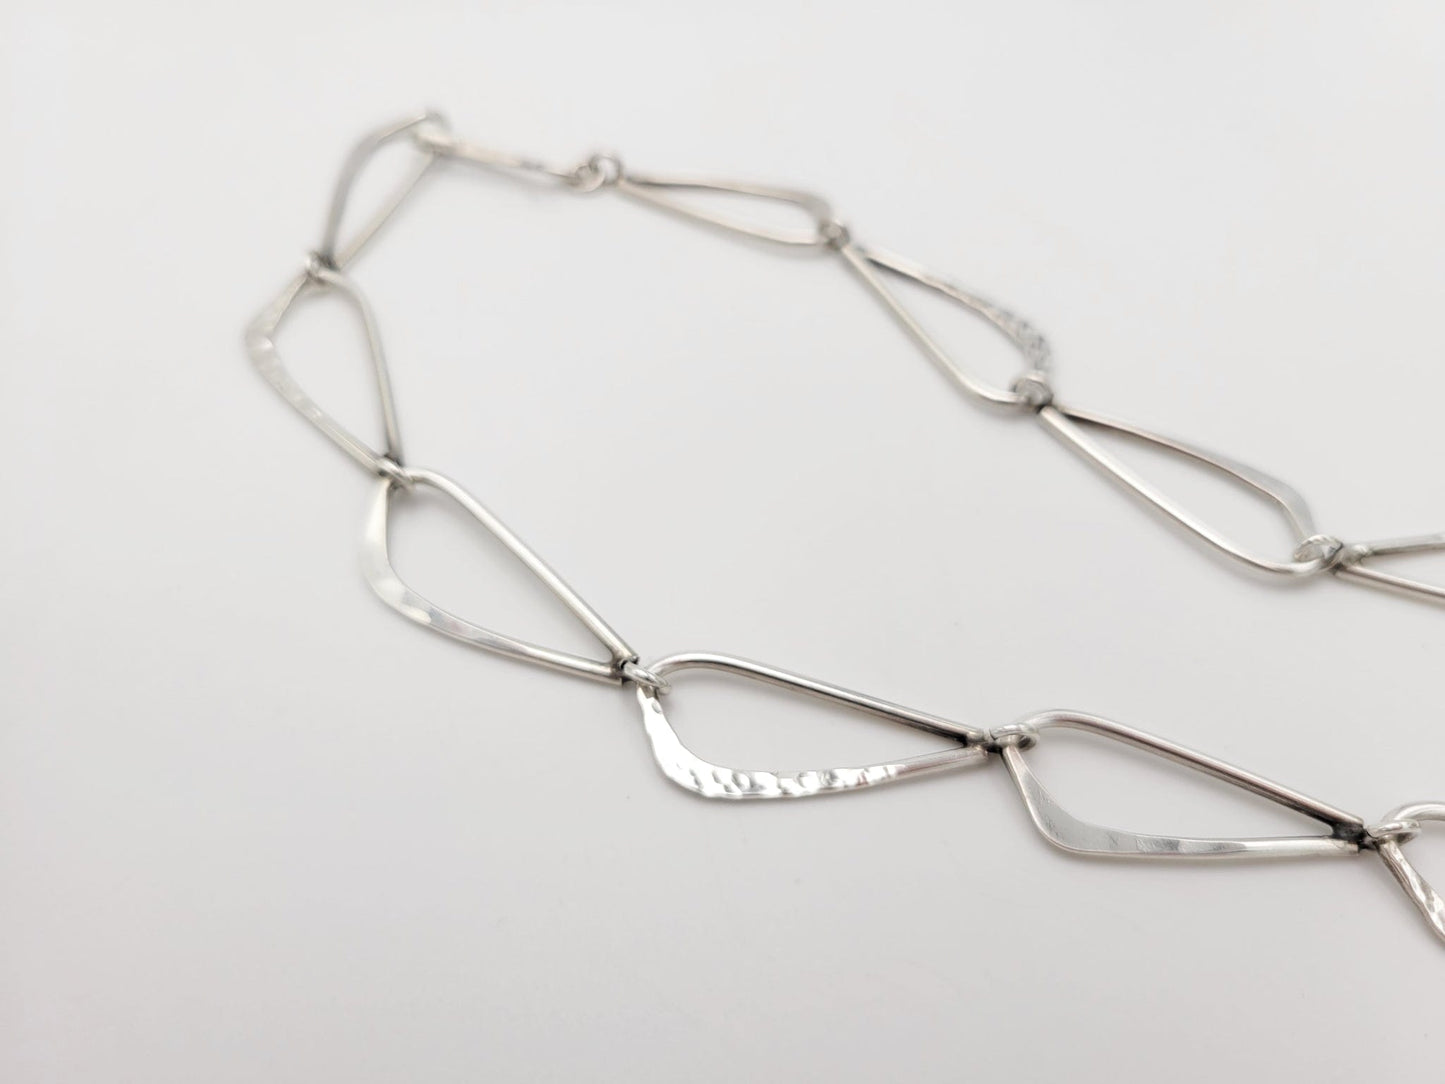 Paul Voltaire Jewelry RARE US Designer Paul Voltaire OOAK Sterling Abstract Modernist Necklace 1950s